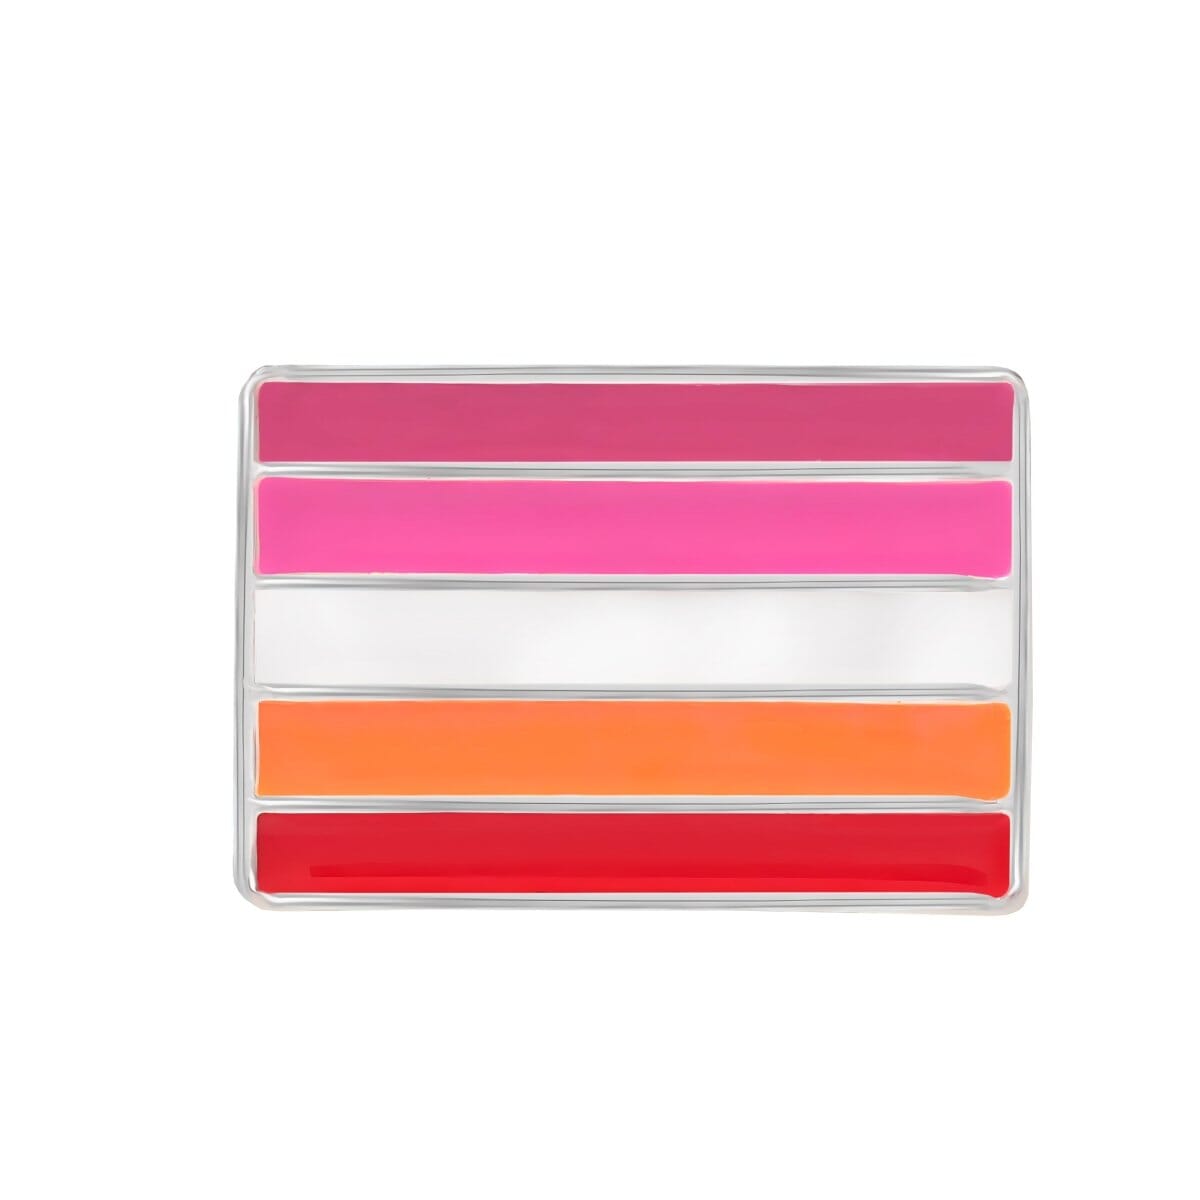 Bulk Pack of Vibrant Lesbian Flag Pins - Show Your Pride with Style